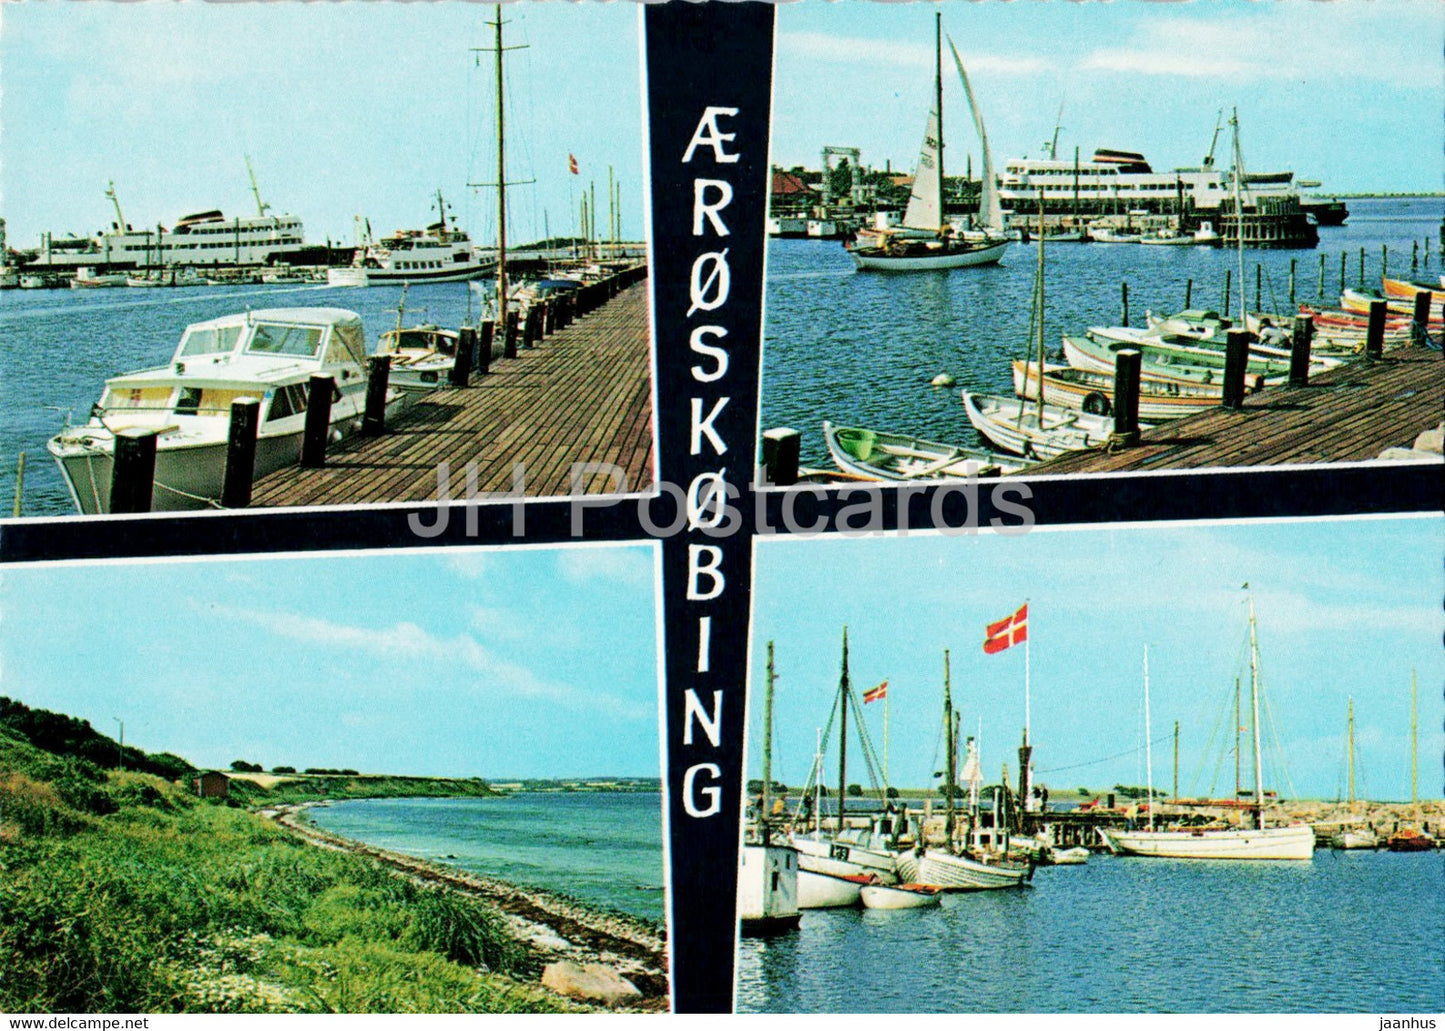 Aeroskobing - The creek of Borgnaes - Harbour - ship - boat - multiview - 1972 - Denmark - used - JH Postcards